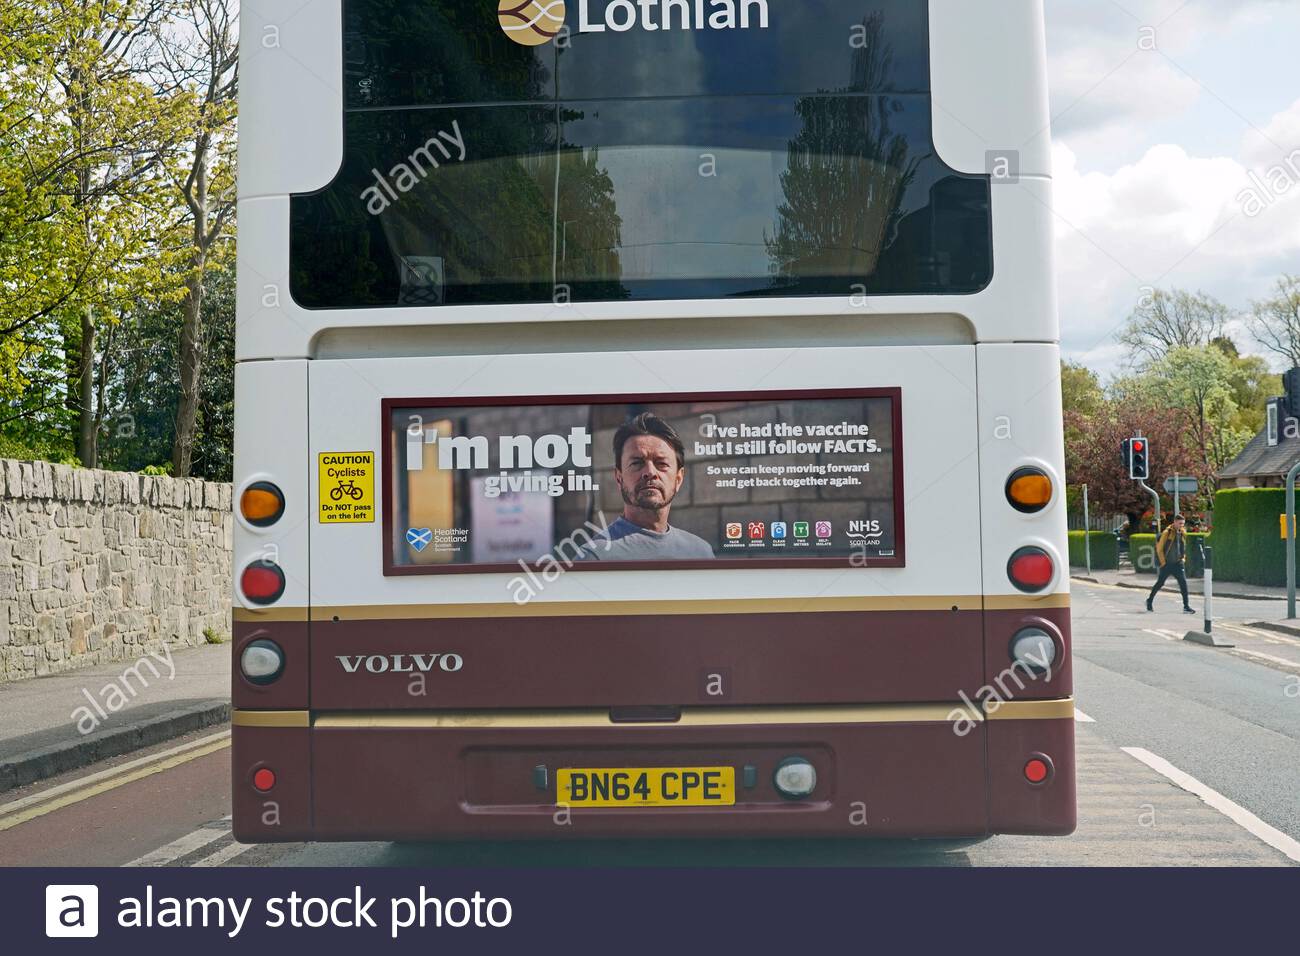 An Edinburgh Lothian Bus with messaging from the Scottish government re the Covid-19 vaccine, Edinburgh Scotland Stock Photo